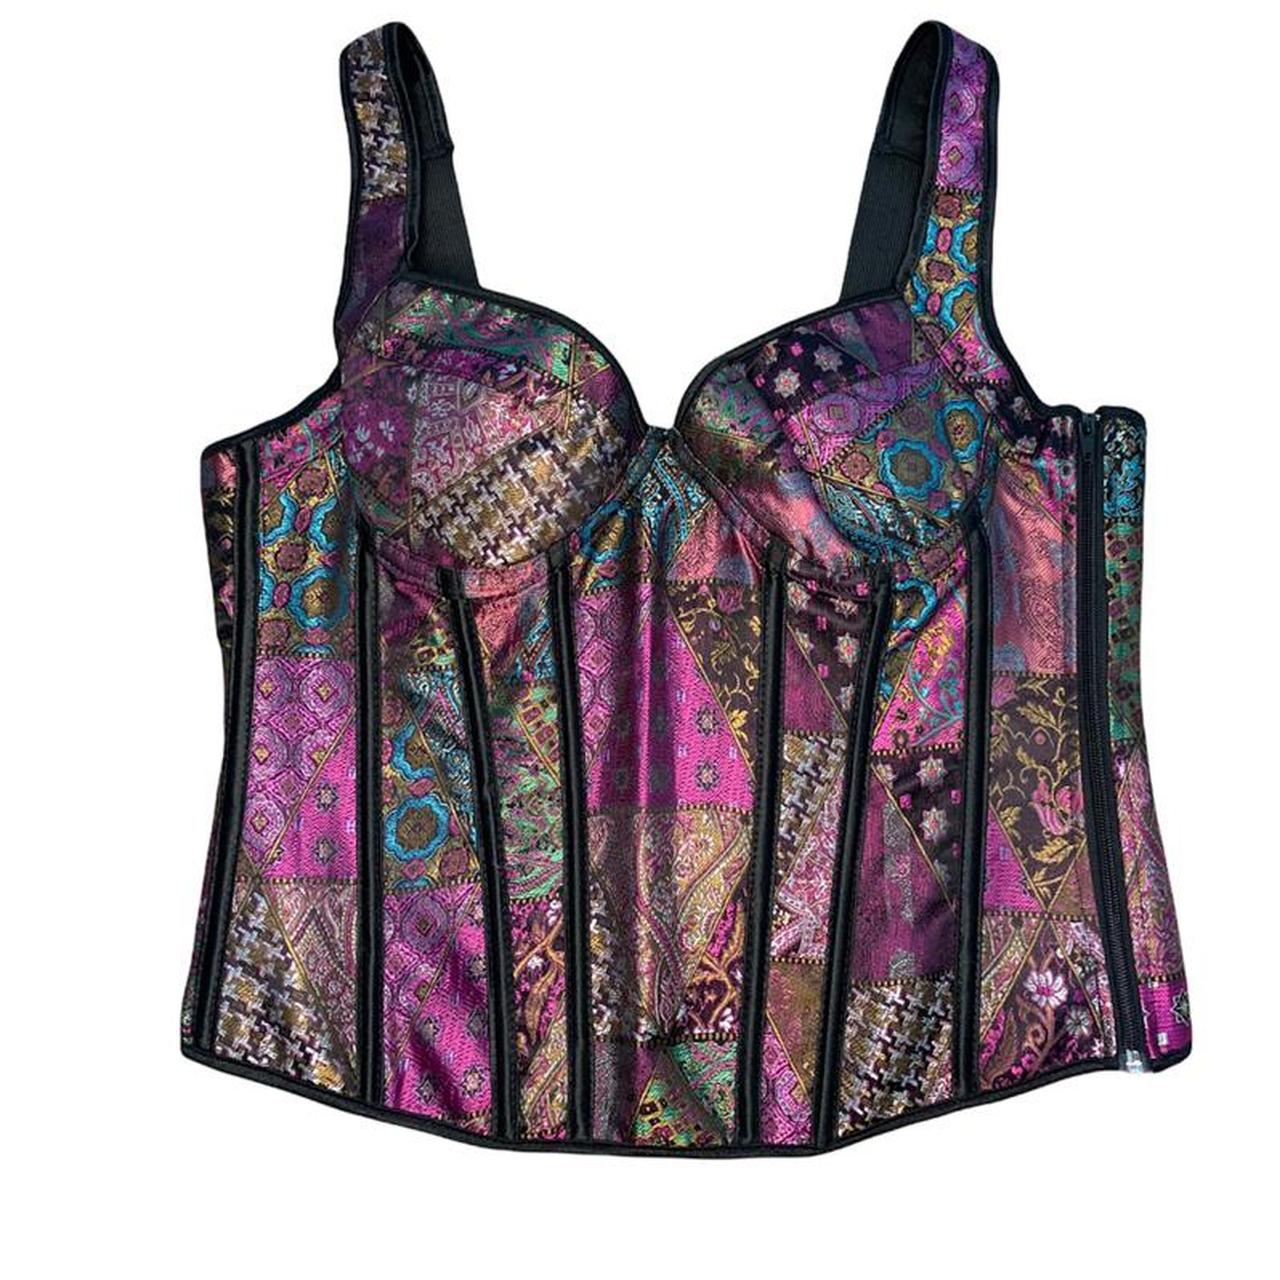 Product Image 1 - Patchwork Corset

Features multiple hues of